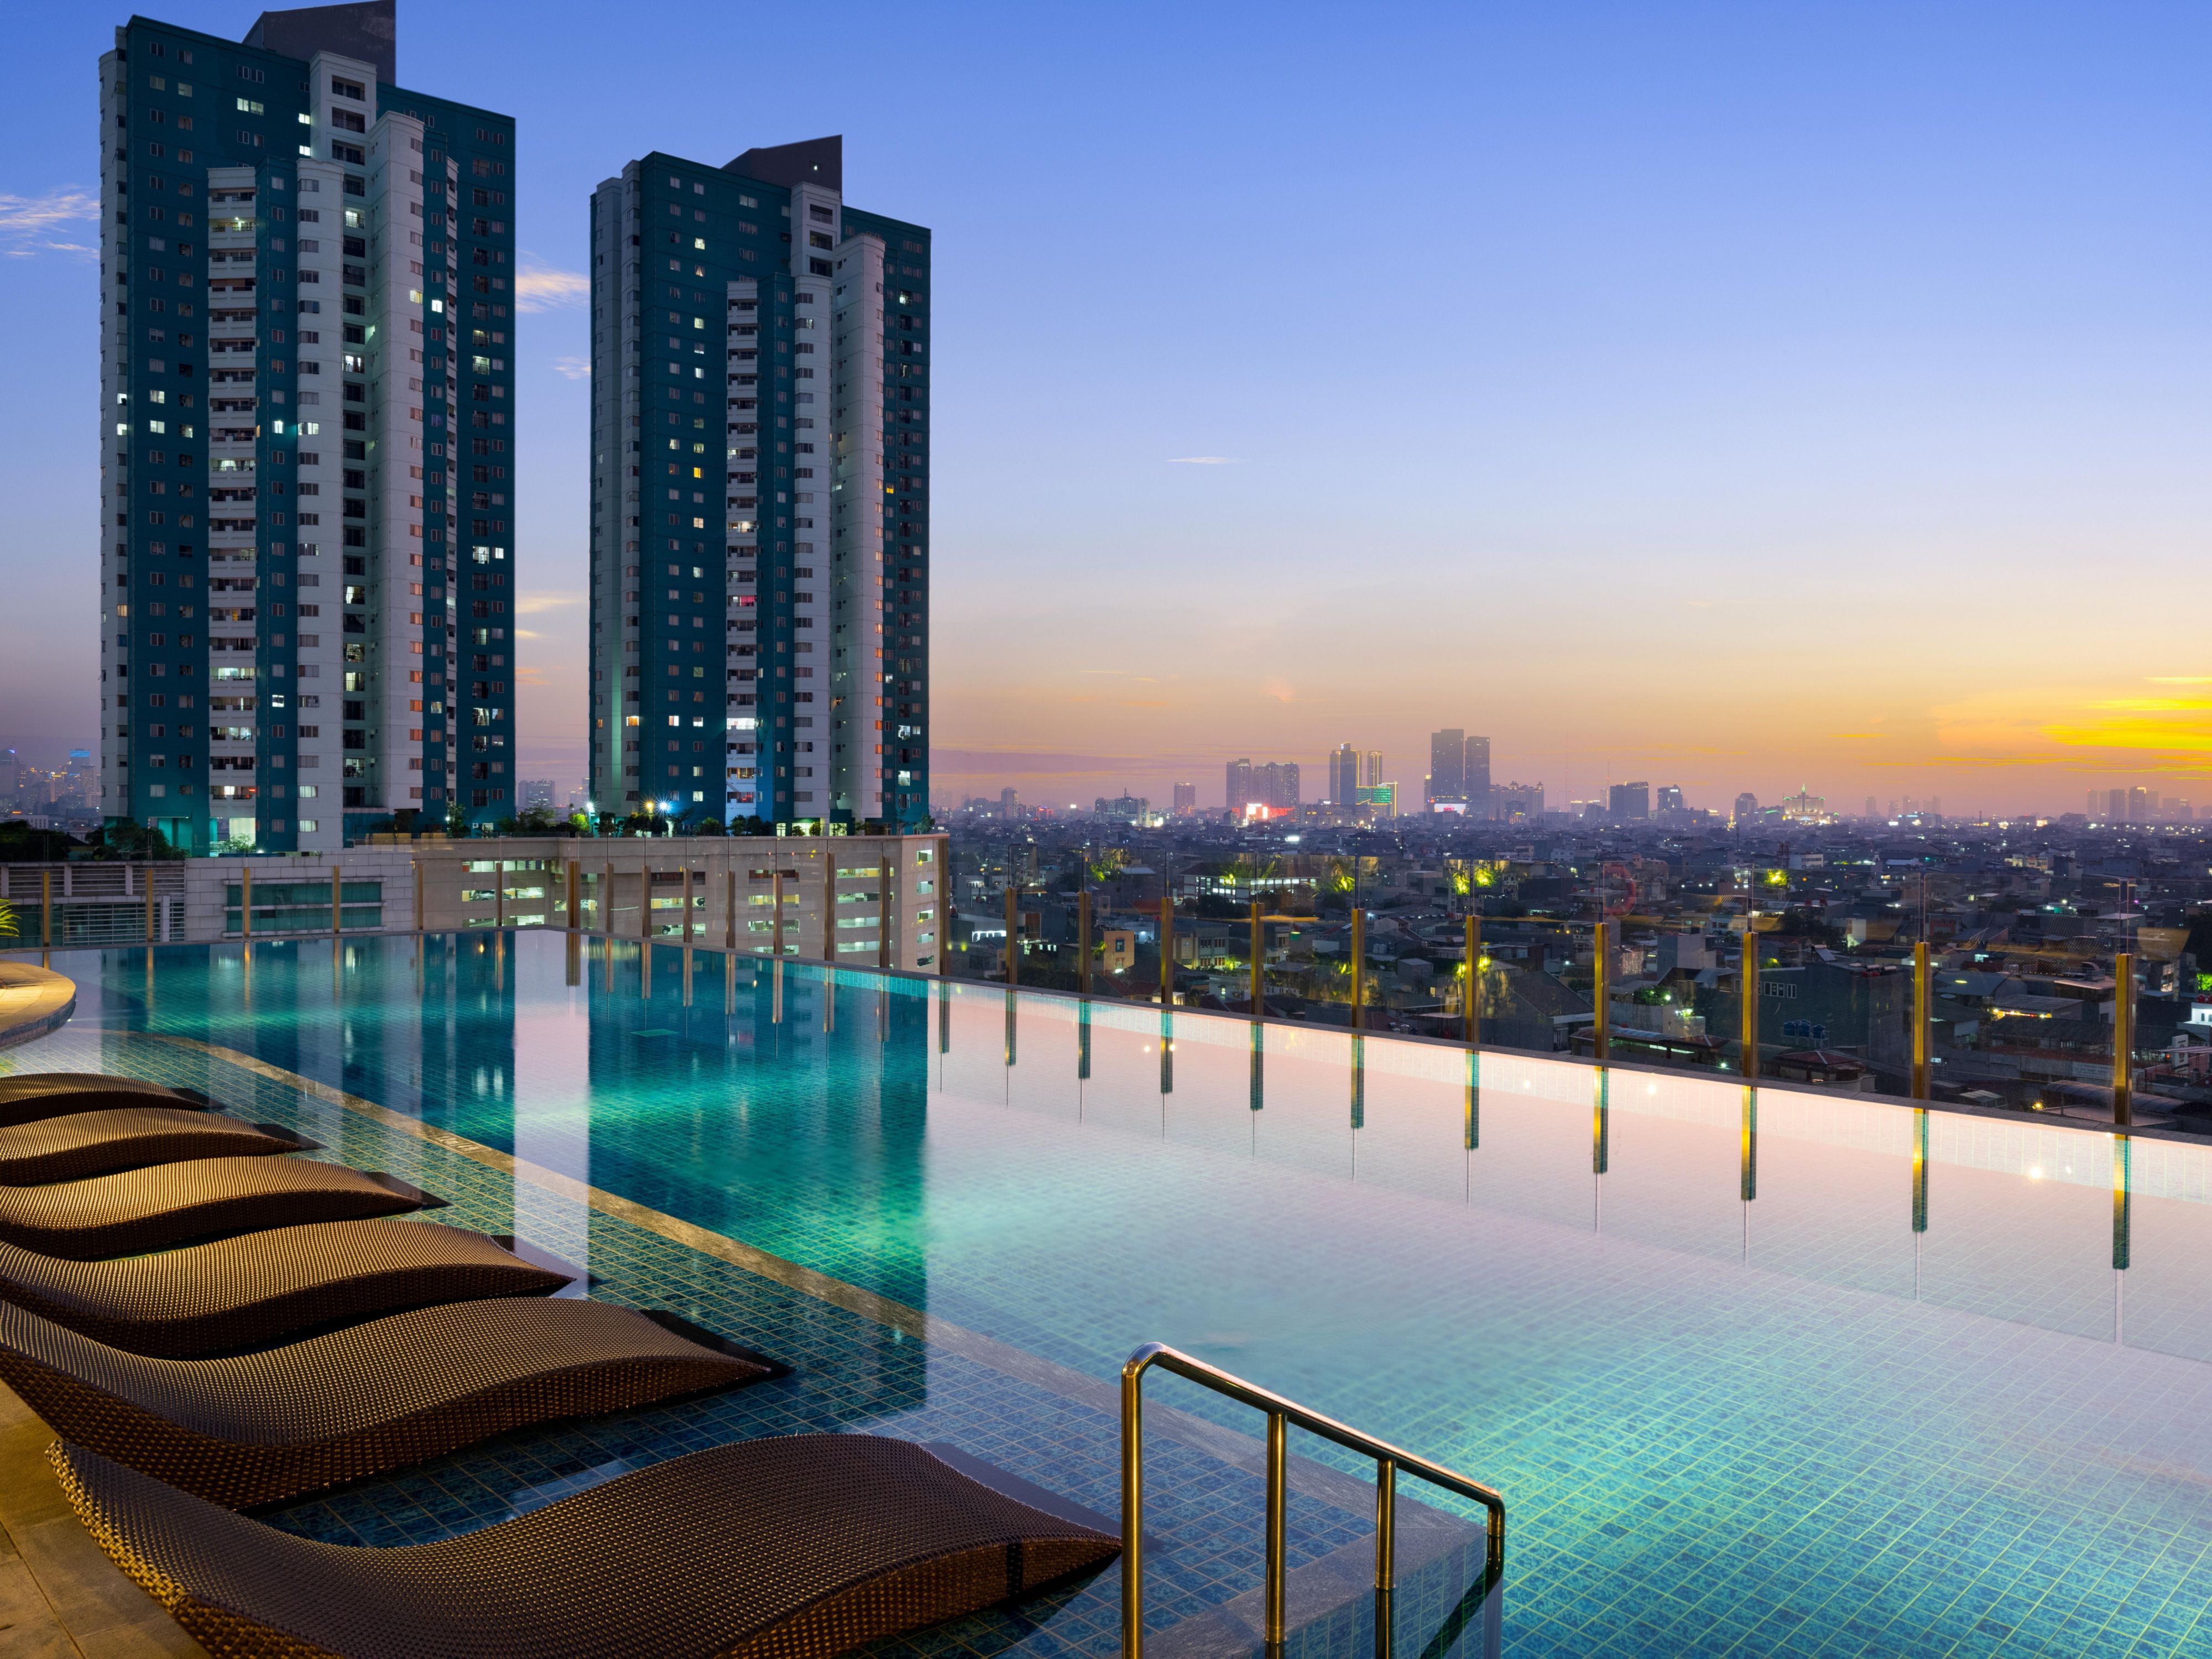 The Holiday Inn & Suites Jakarta Gajah Mada infinity pool offers family-friendly sections as well as a dedicated children's pool. You will find an instagrammable photo-taking spot. After your swim, stretch out to sunbathe on a poolside lounger, or relax at the Pool Bar.